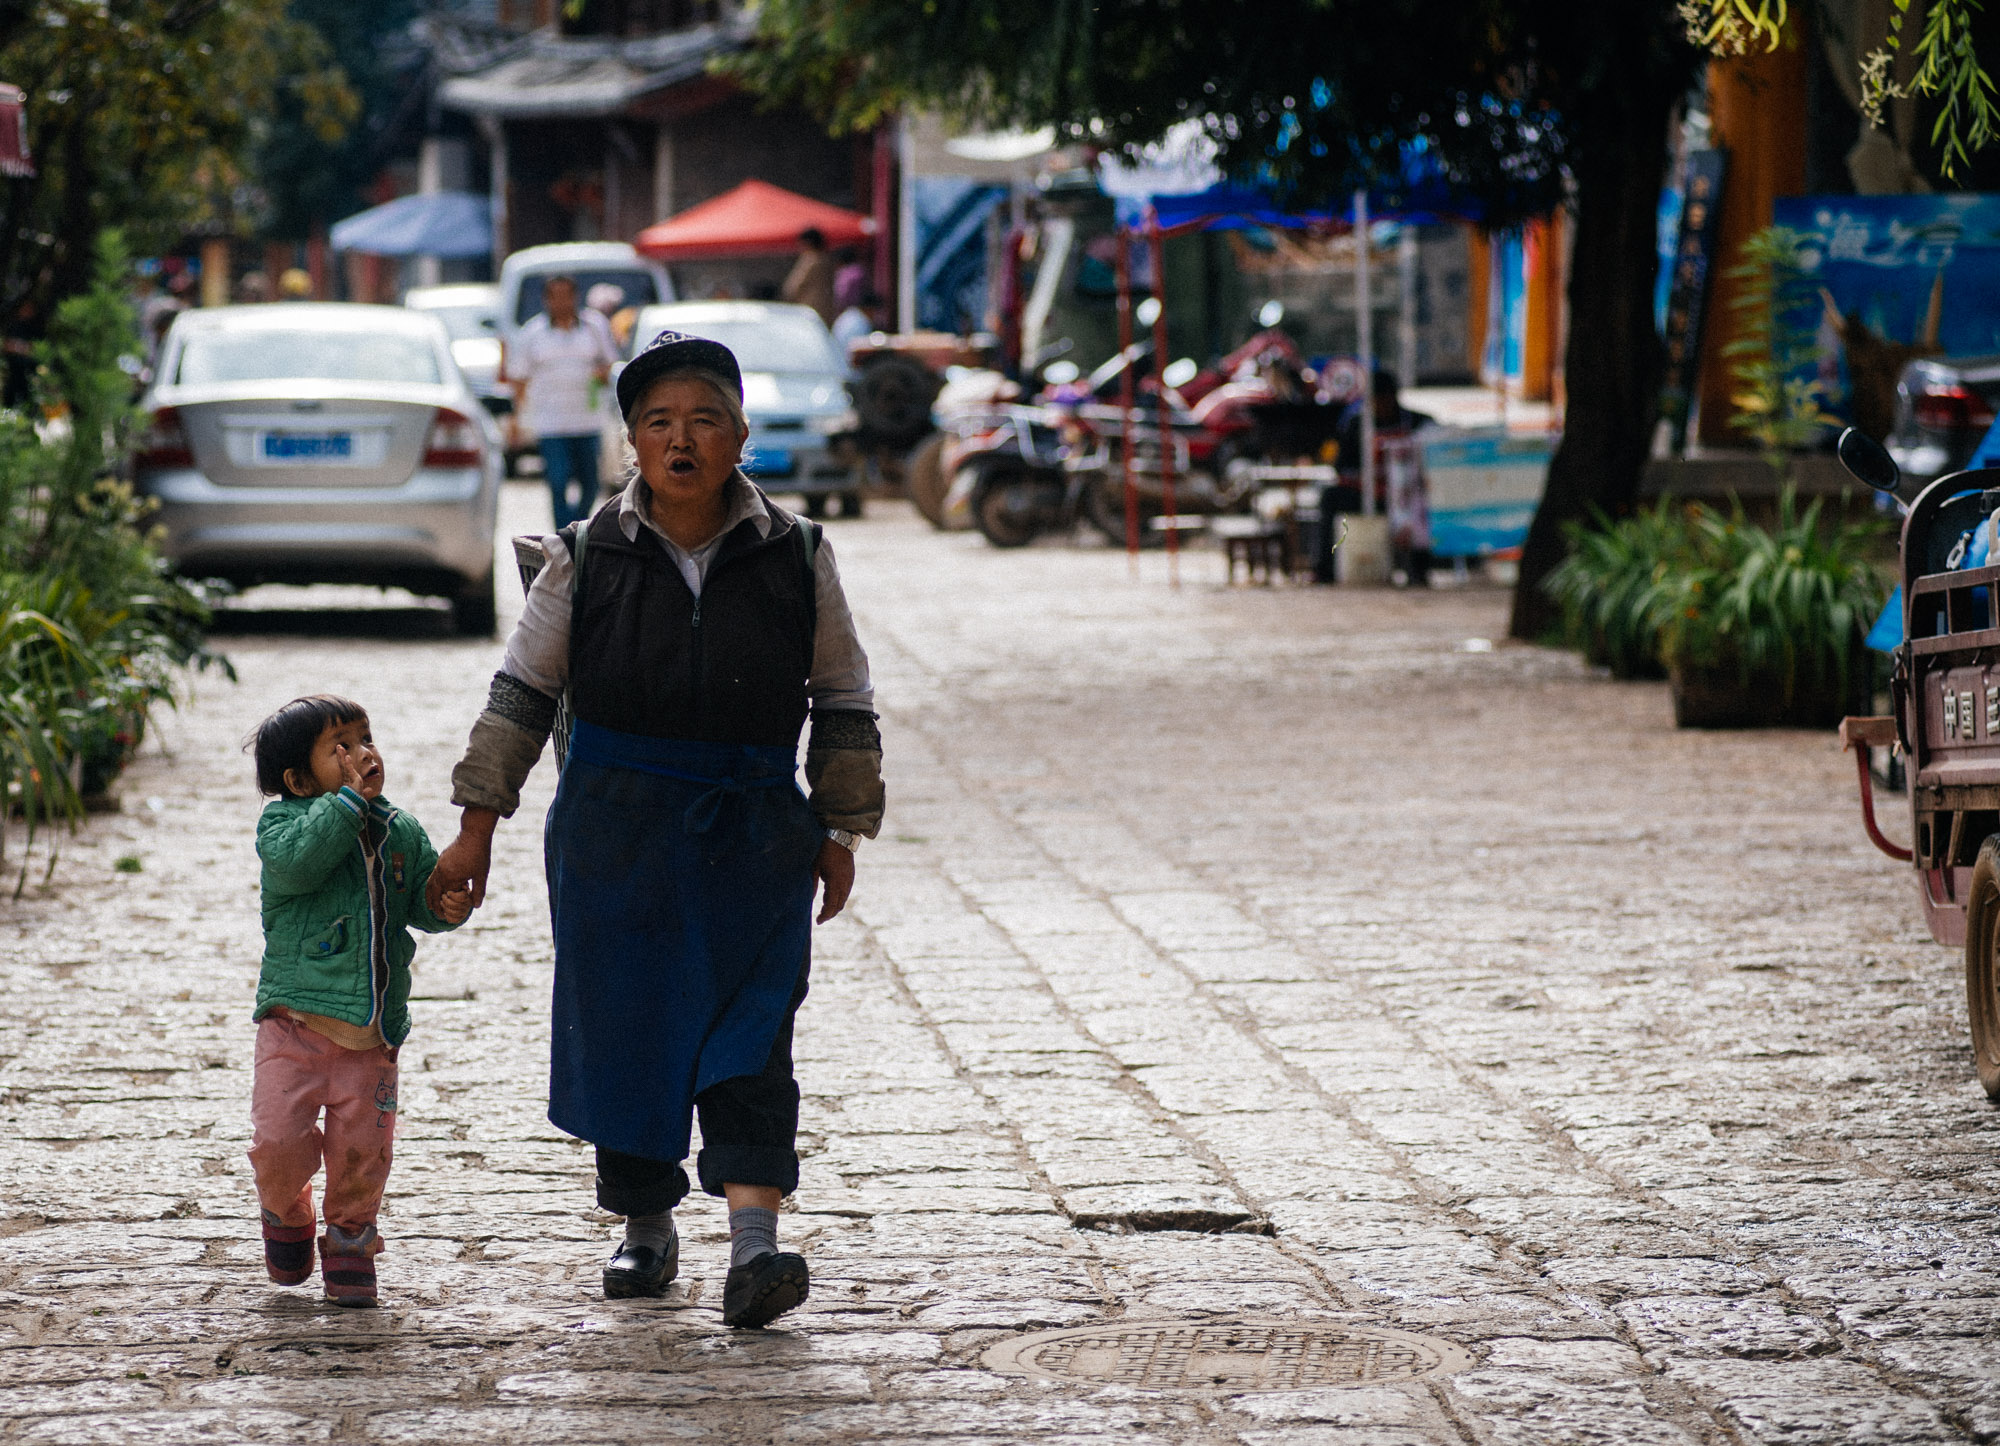  As most places in China, grandmothers take care of children while the parents go to bigger cities for better jobs and send money home. 